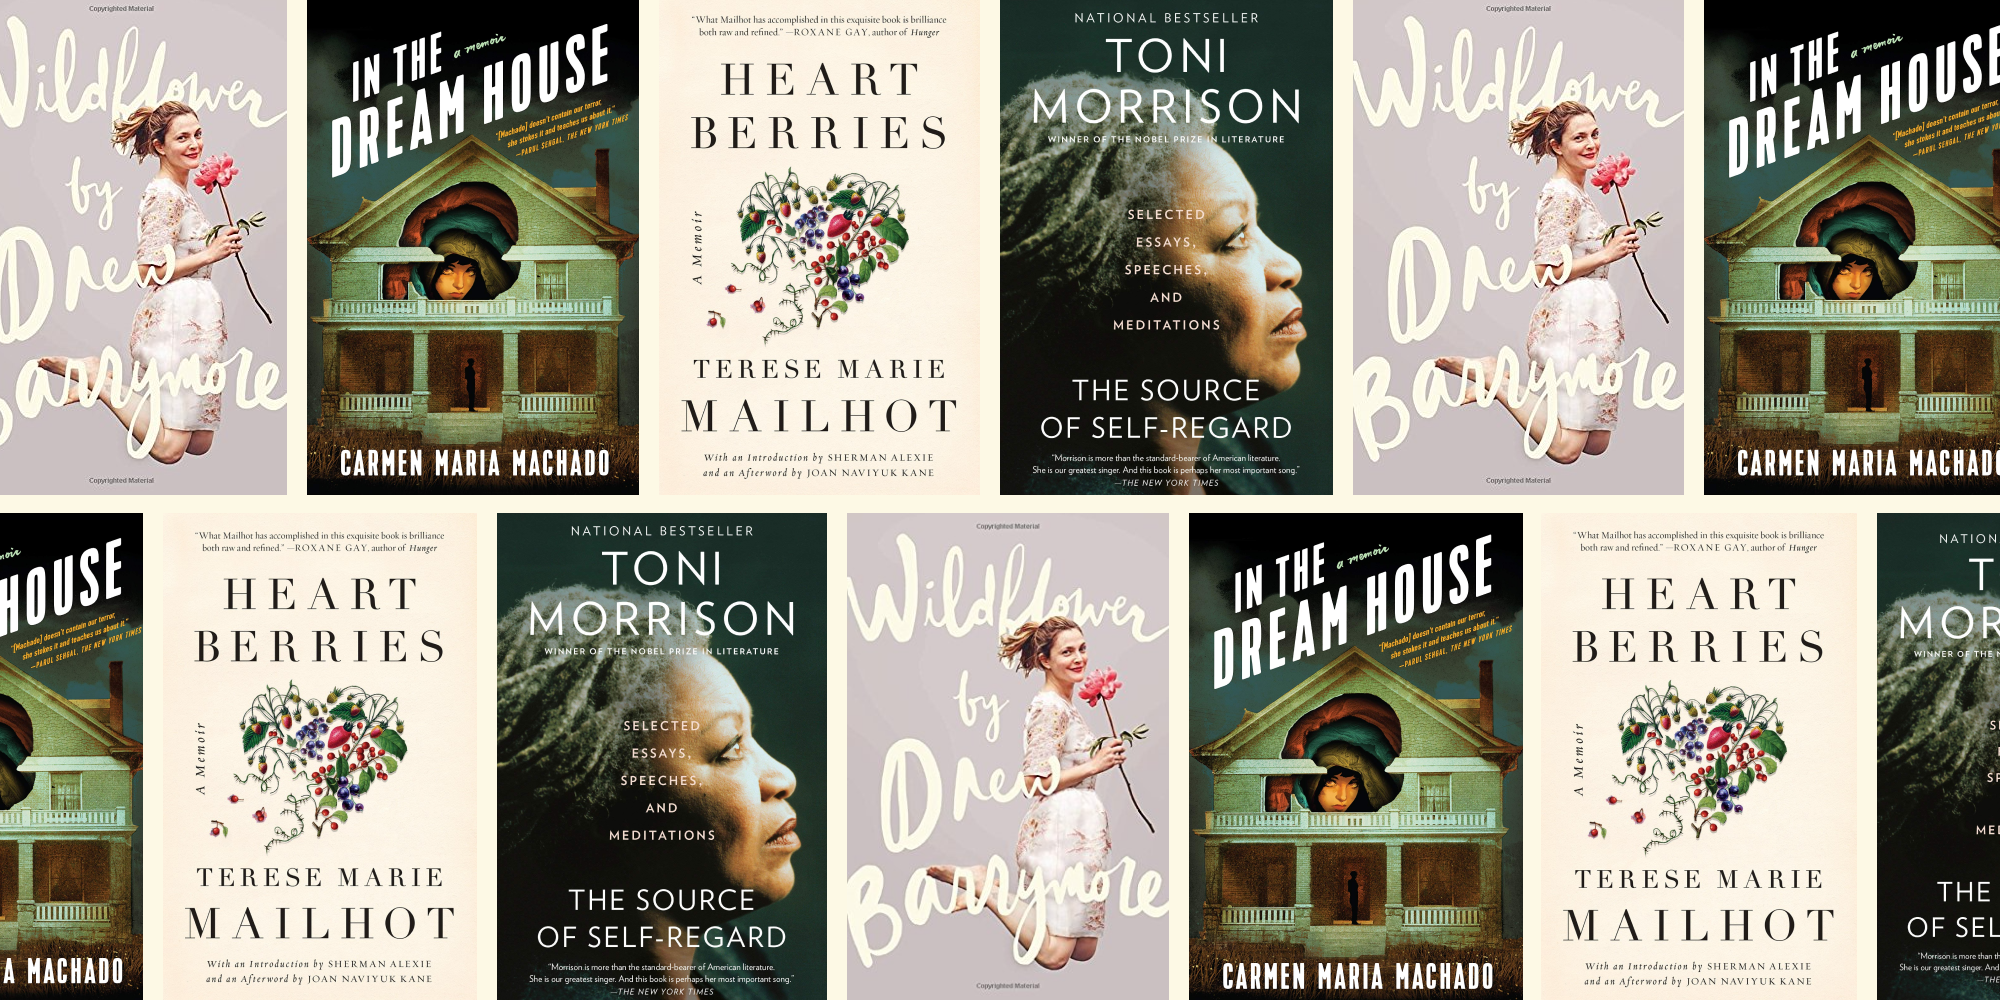 9 Empowering Books About Dynamic Women Pursuing Their Dreams - Off the Shelf